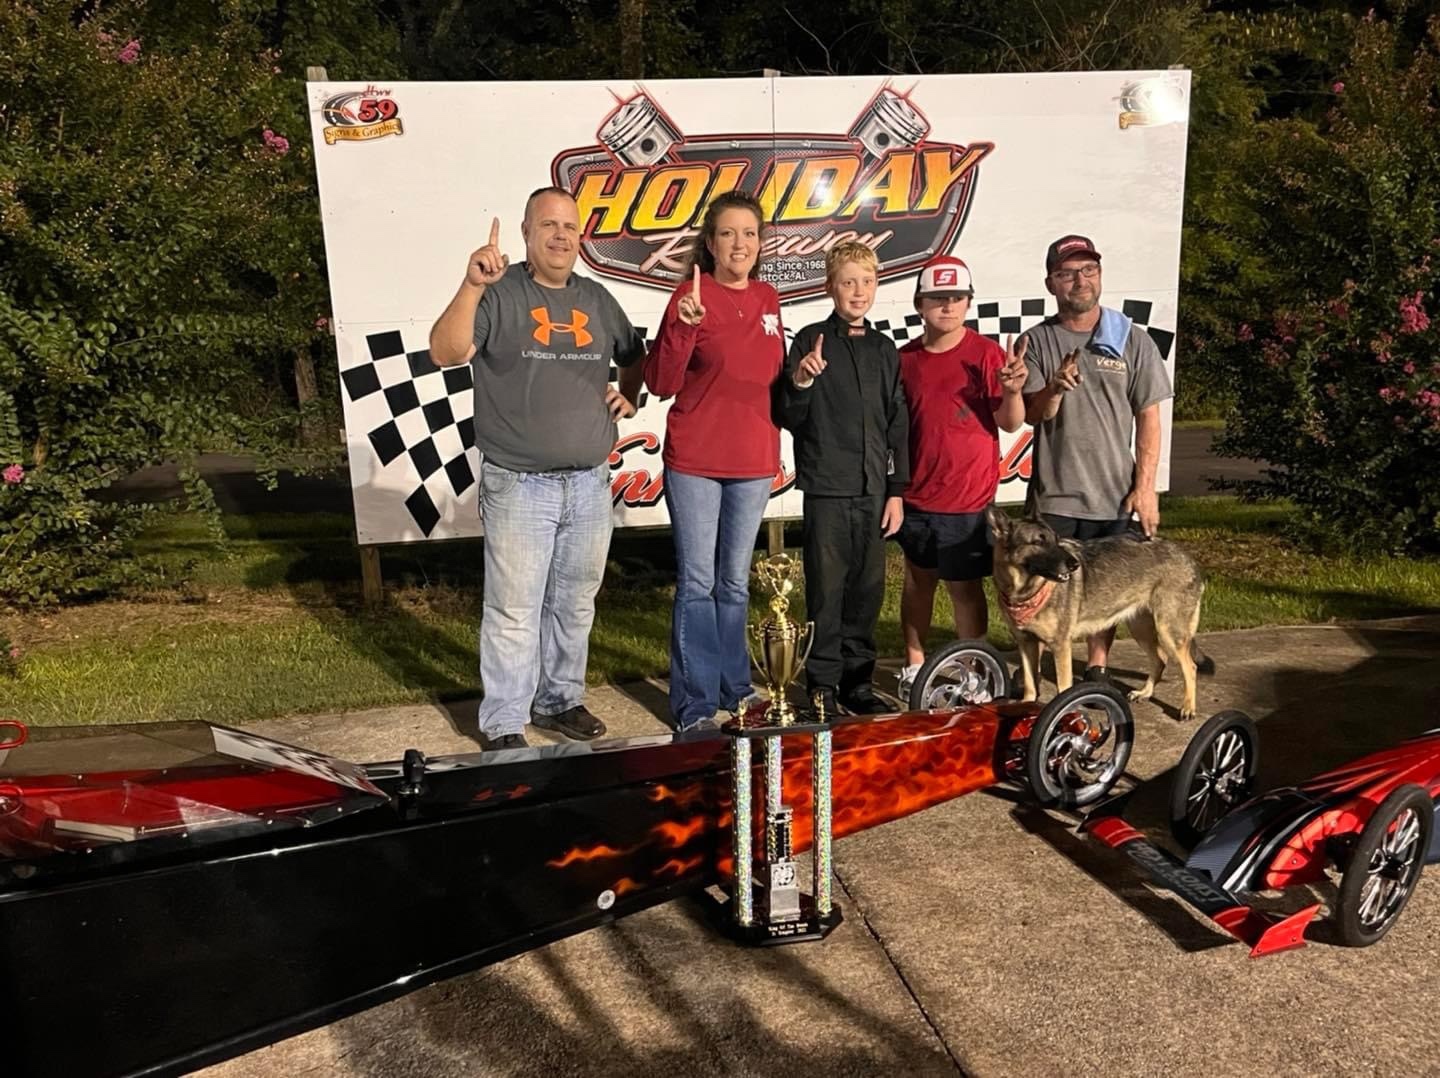 “King of the Beach” Winners Crowned at Holiday Beach Raceway in Alabama